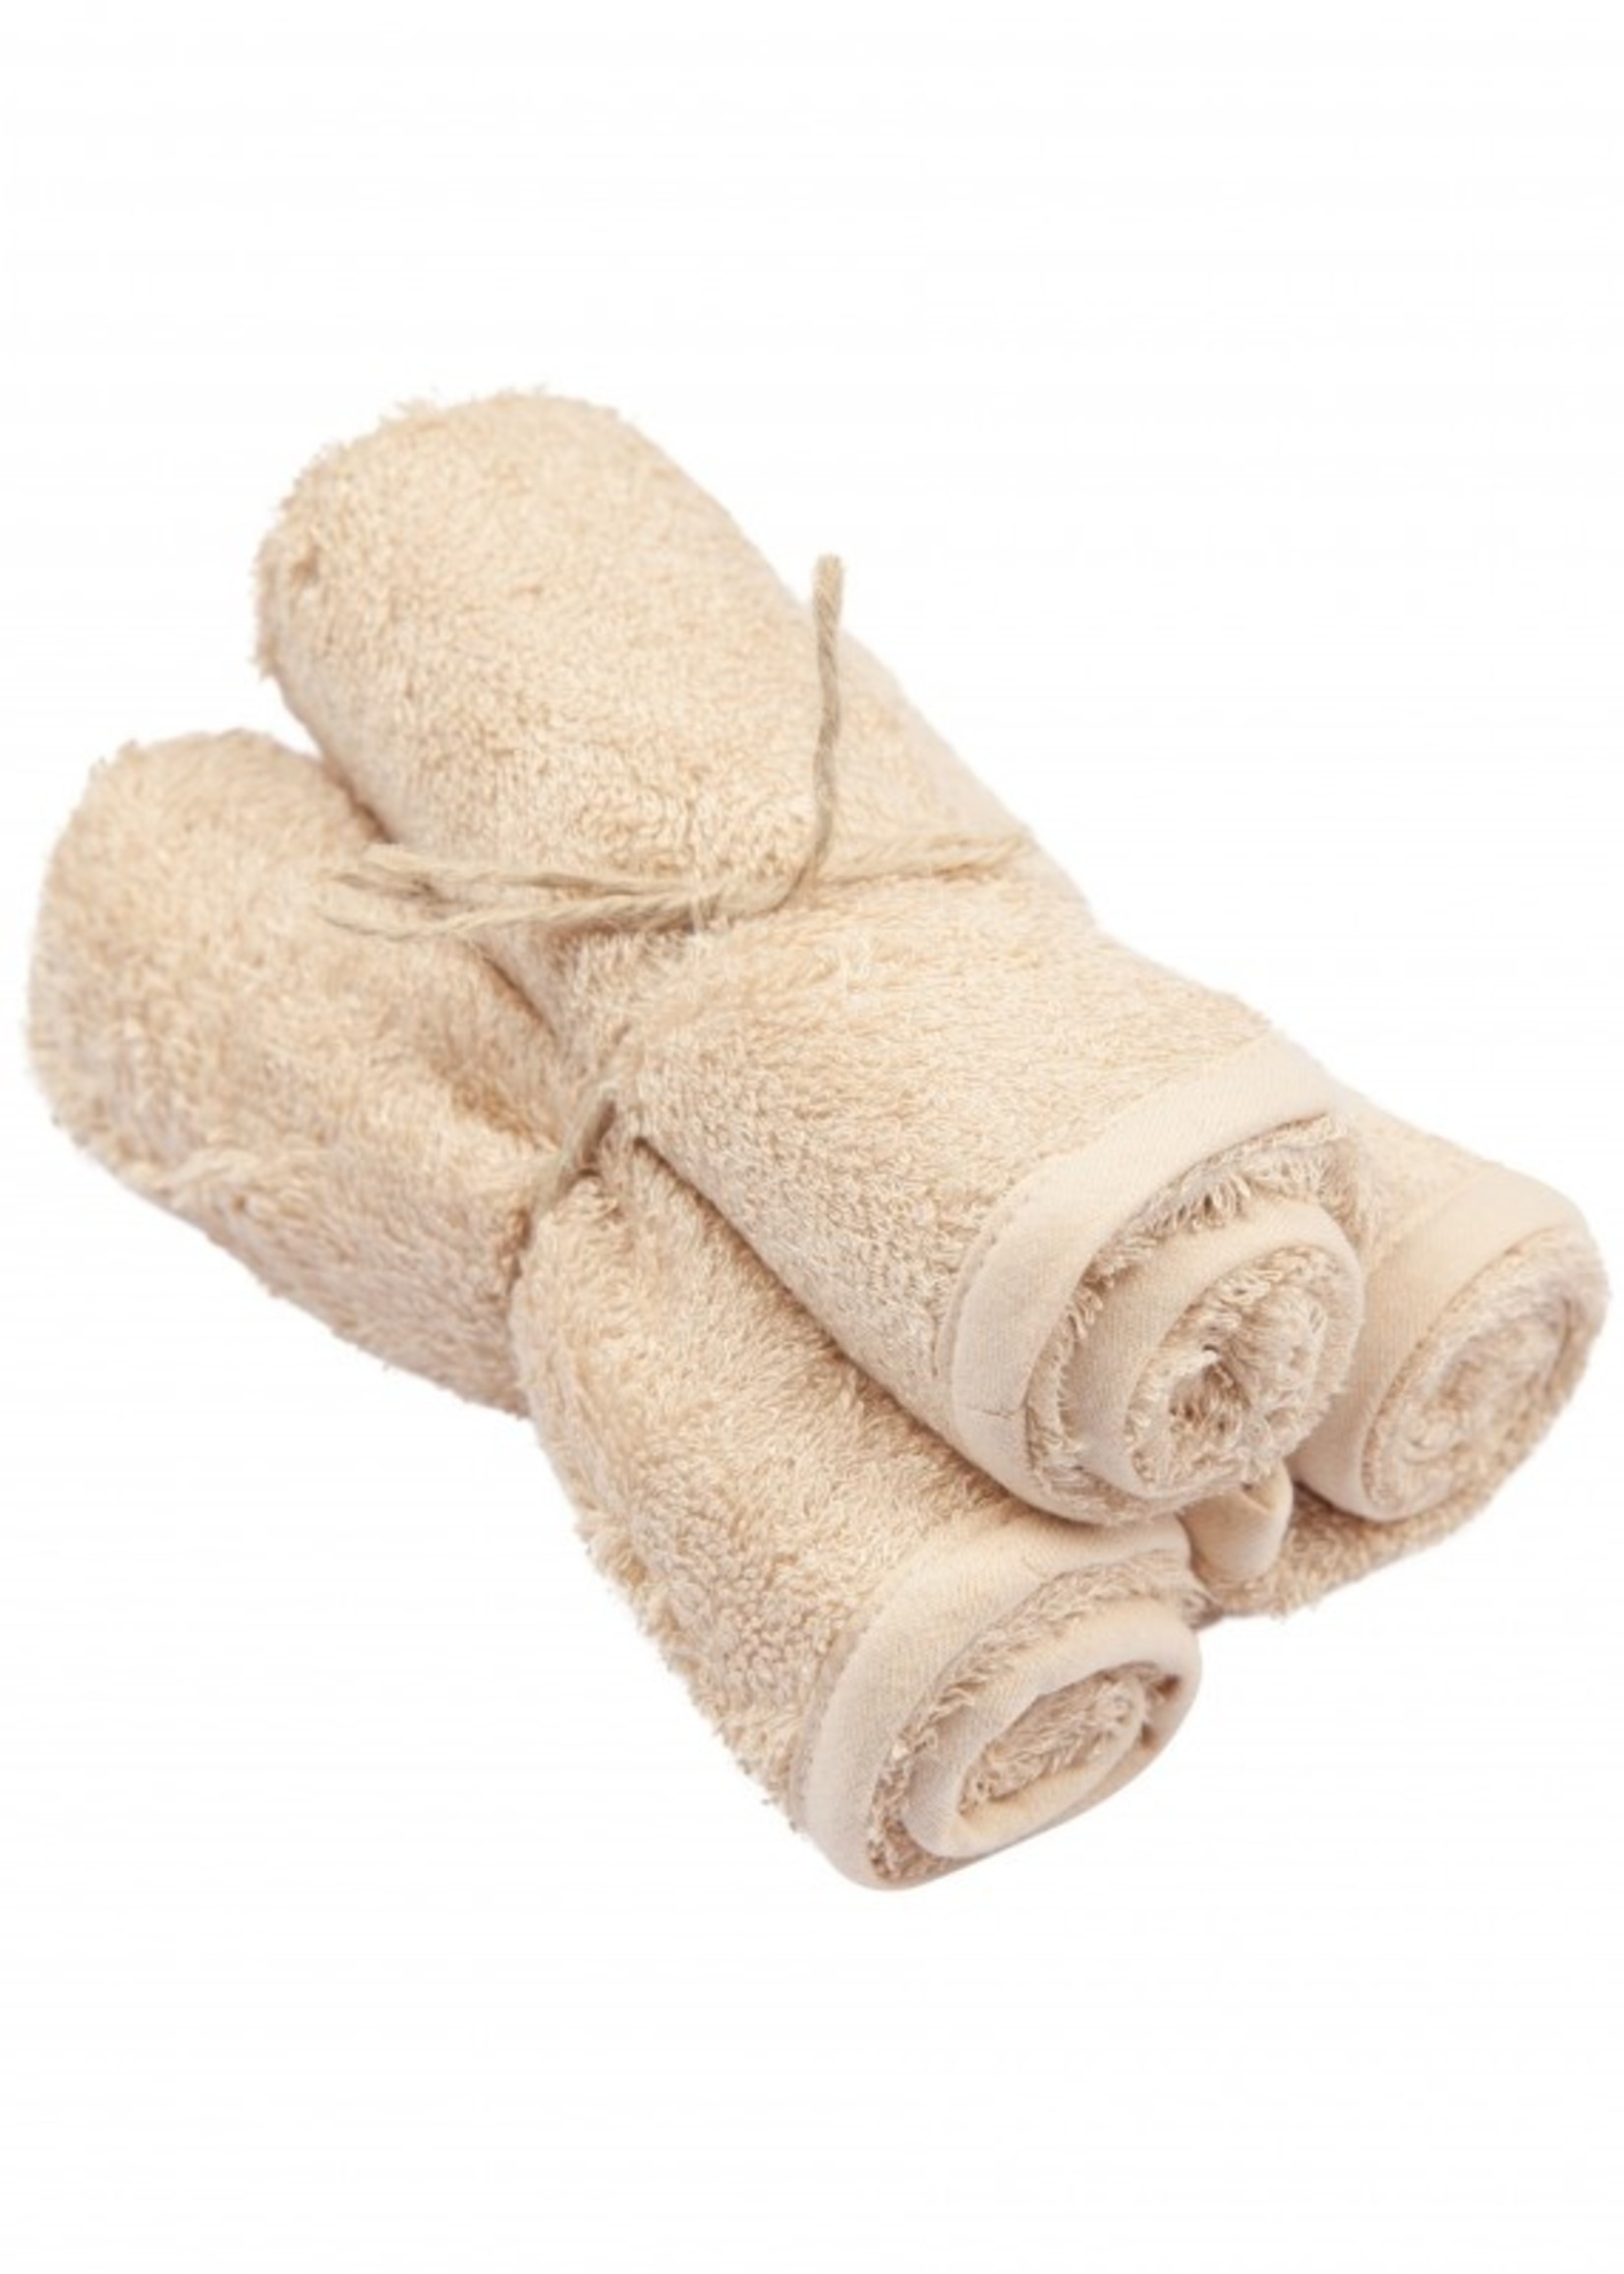 Timboo Guest towel